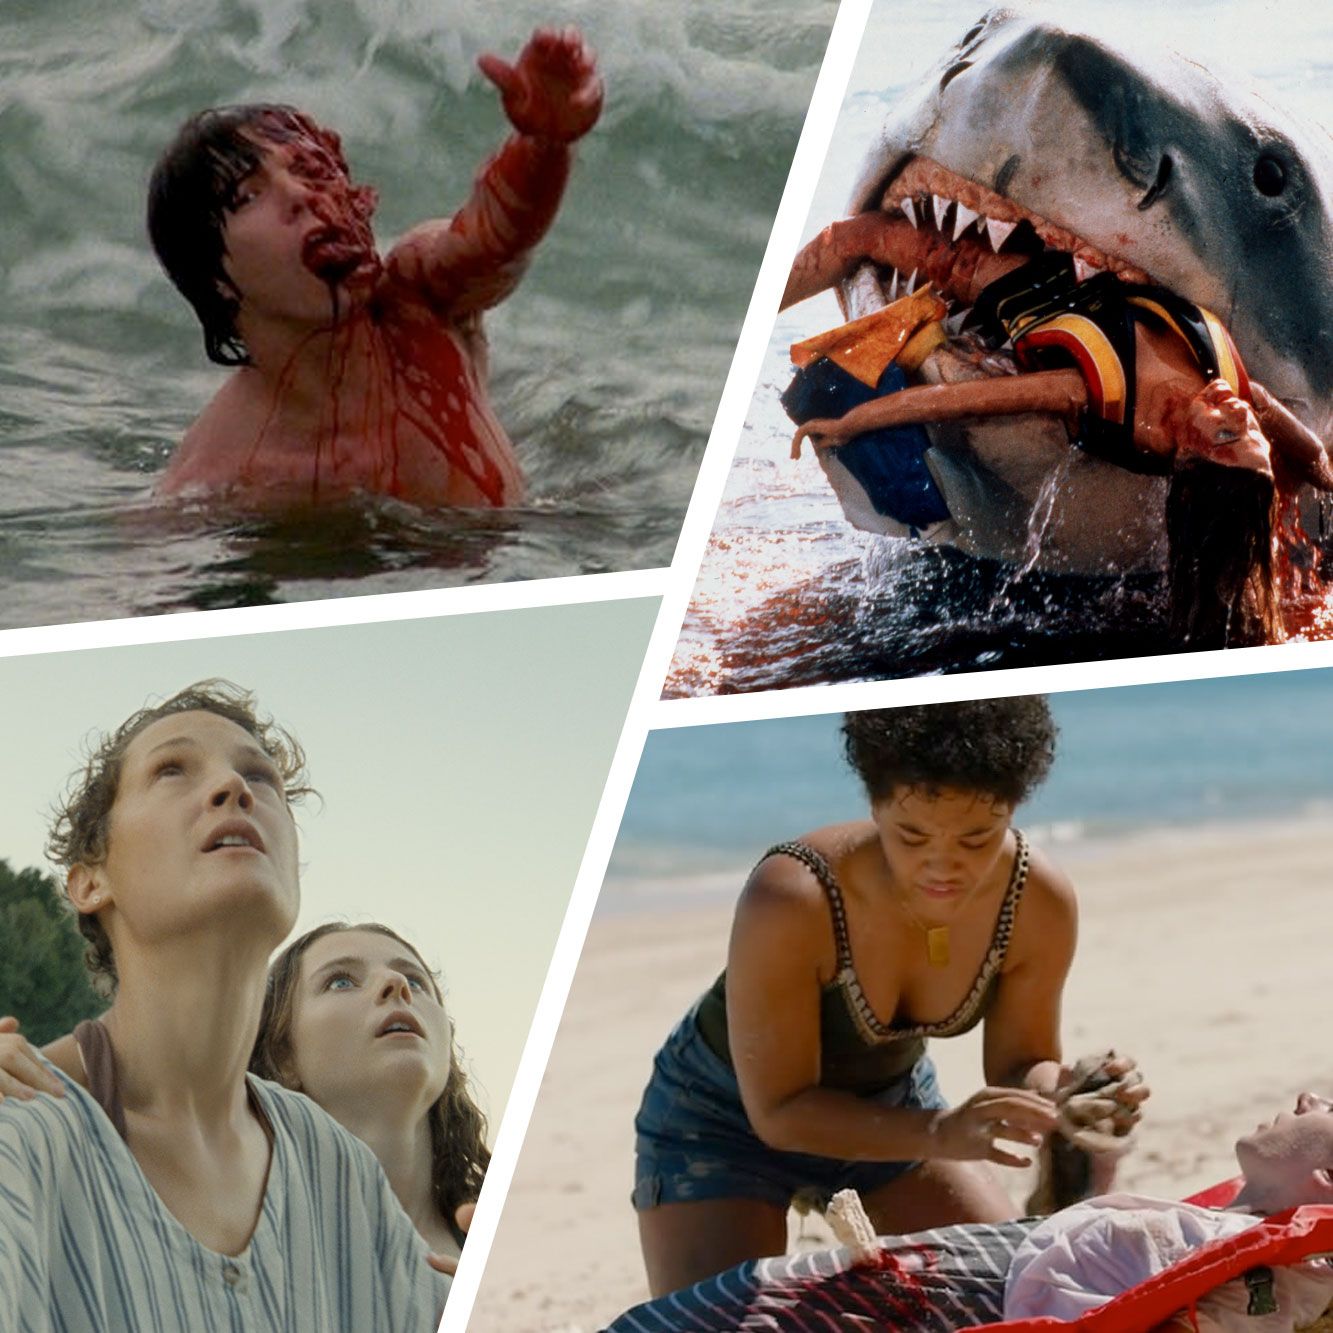 The Best Seaside Horror Movies to Watch This Summer